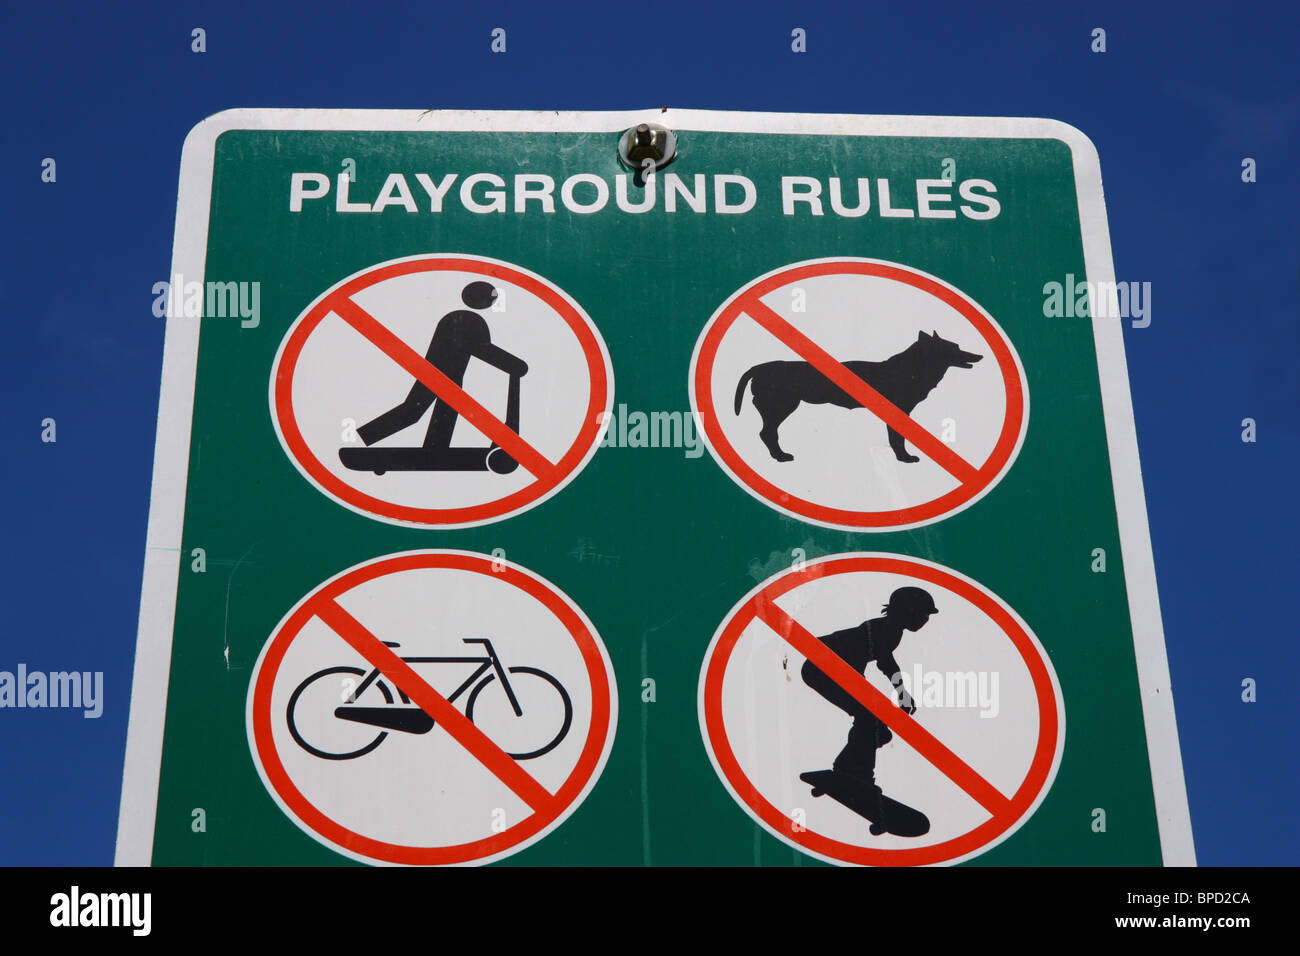 Sign at a playground forbidding scooters, skateboards, dogs, and bicycles Stock Photo